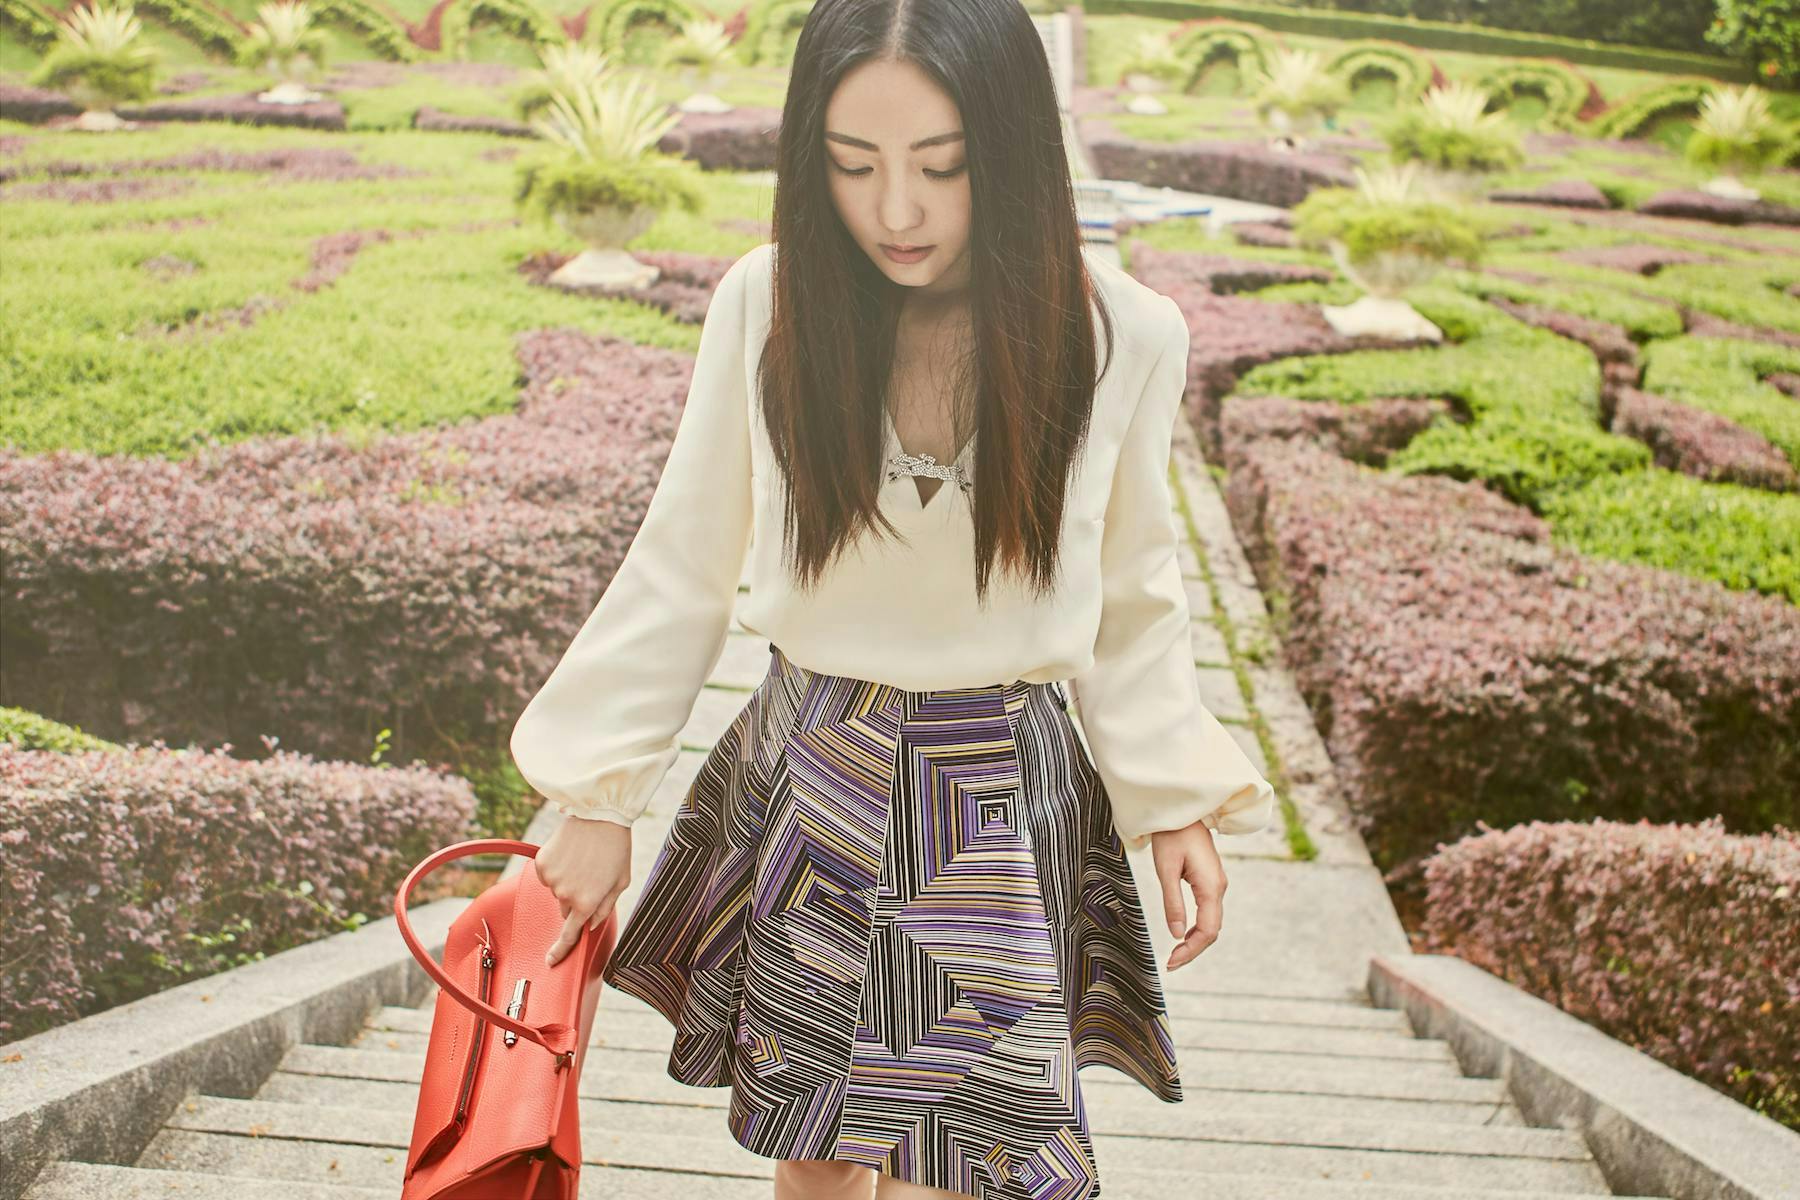 clothing apparel person human female woman skirt